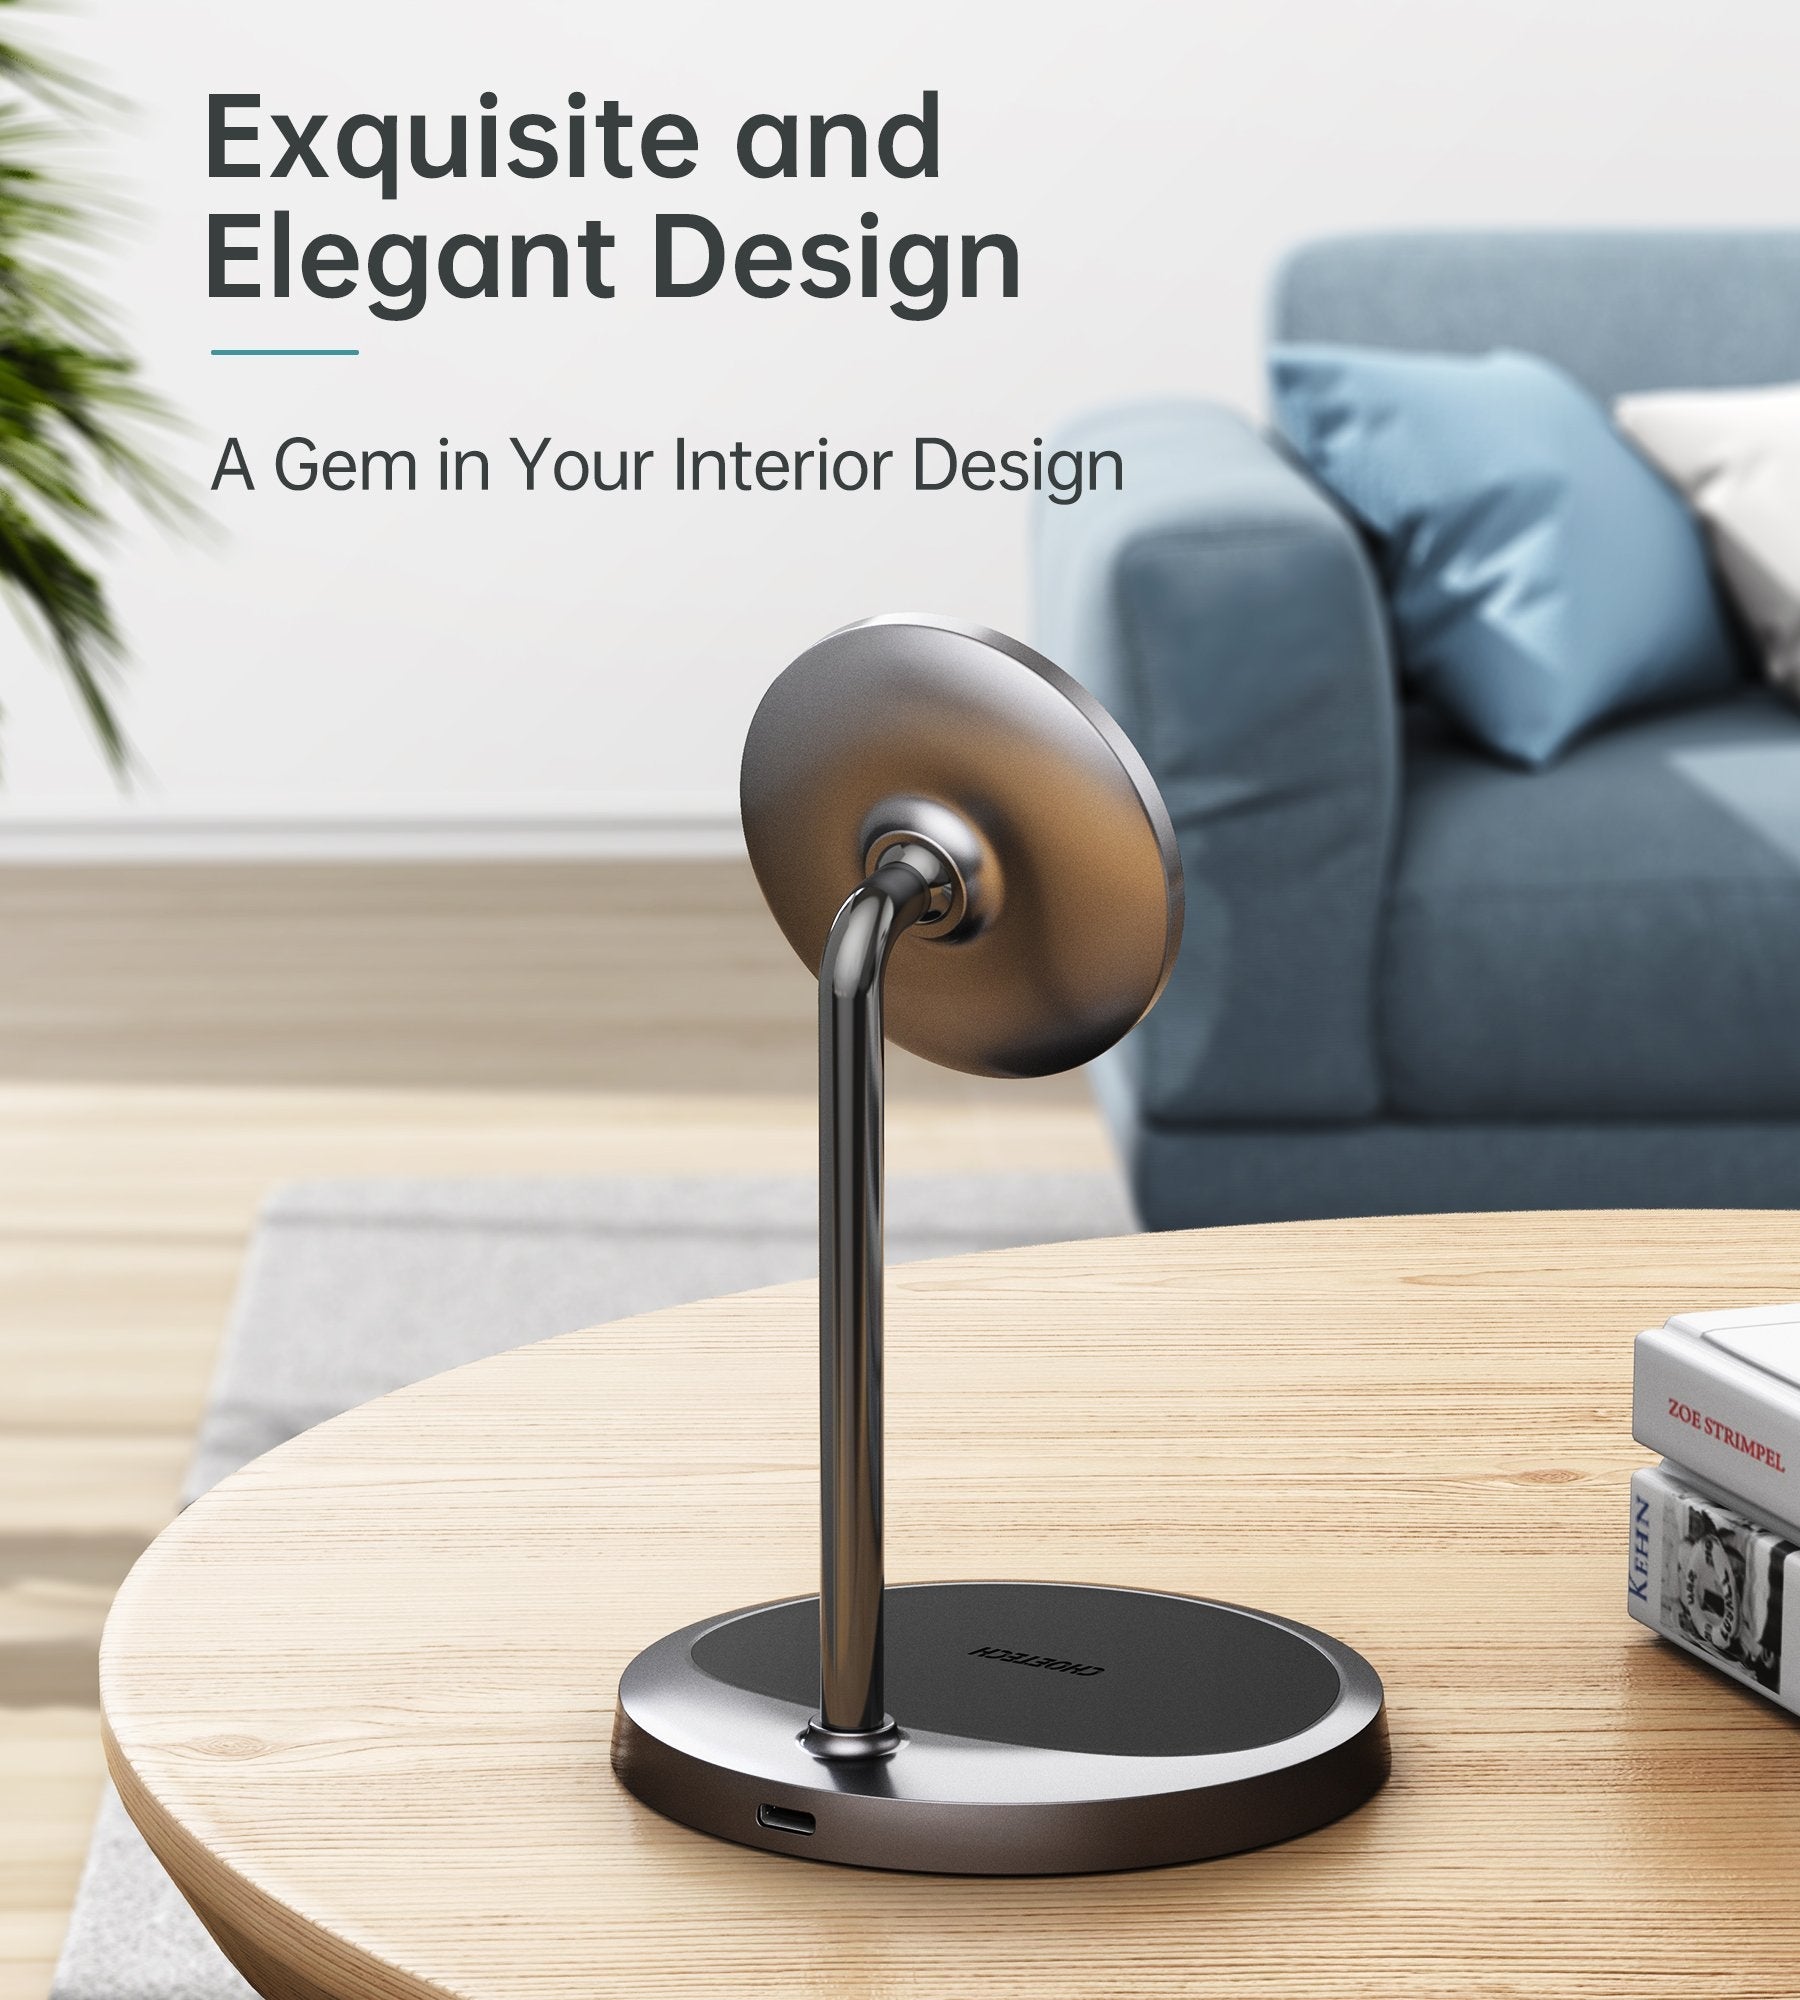 iPhone Magnetic Wireless Charger Stand